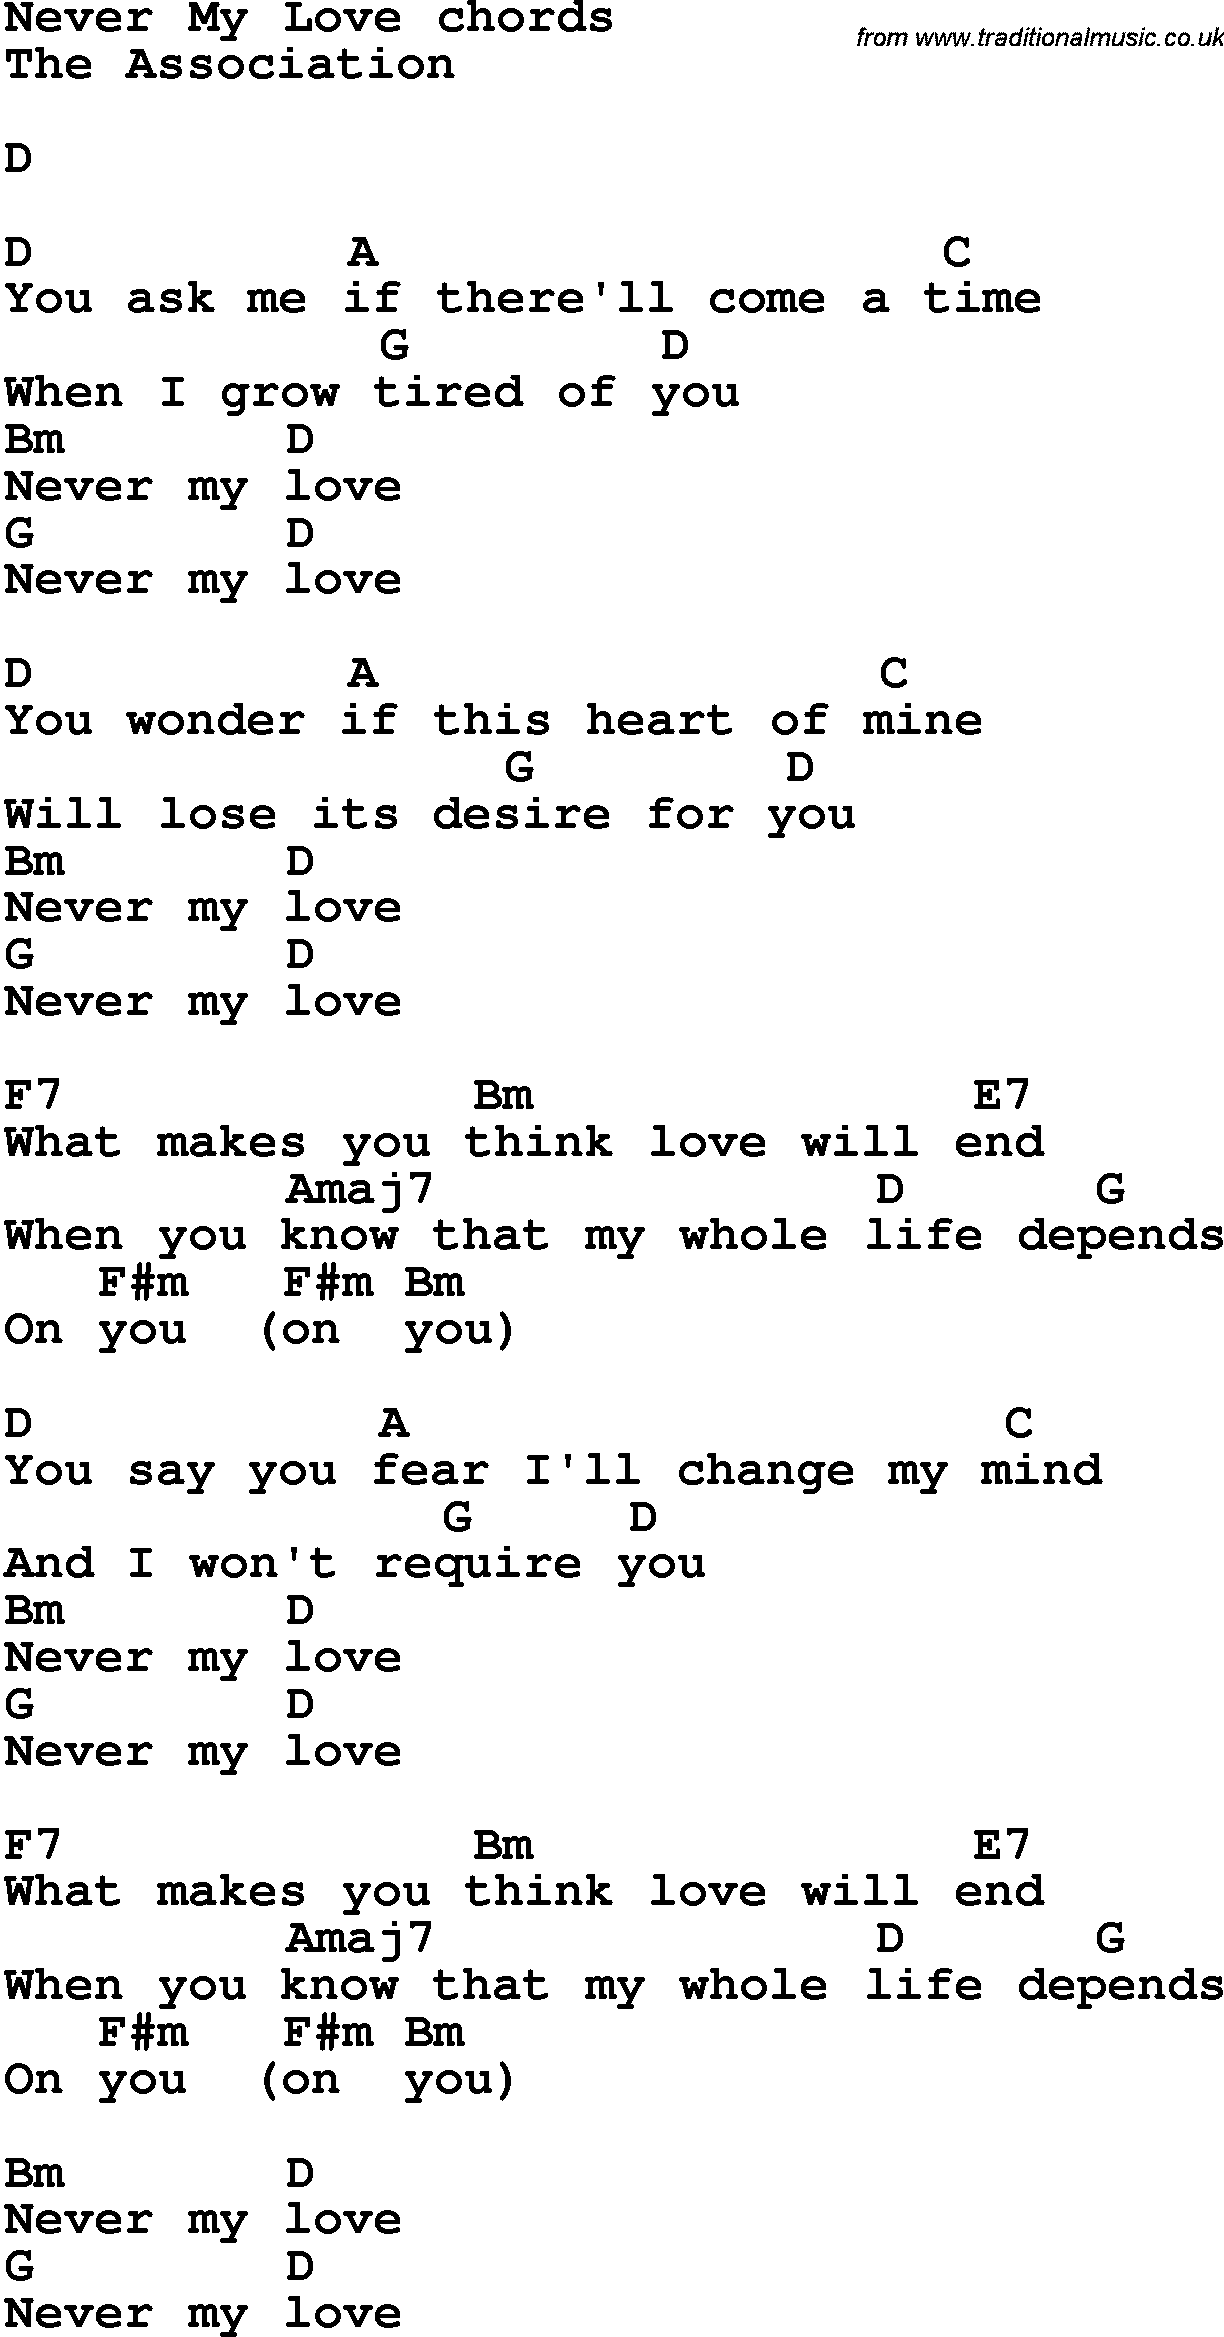 Song Lyrics with guitar chords for Never My Love